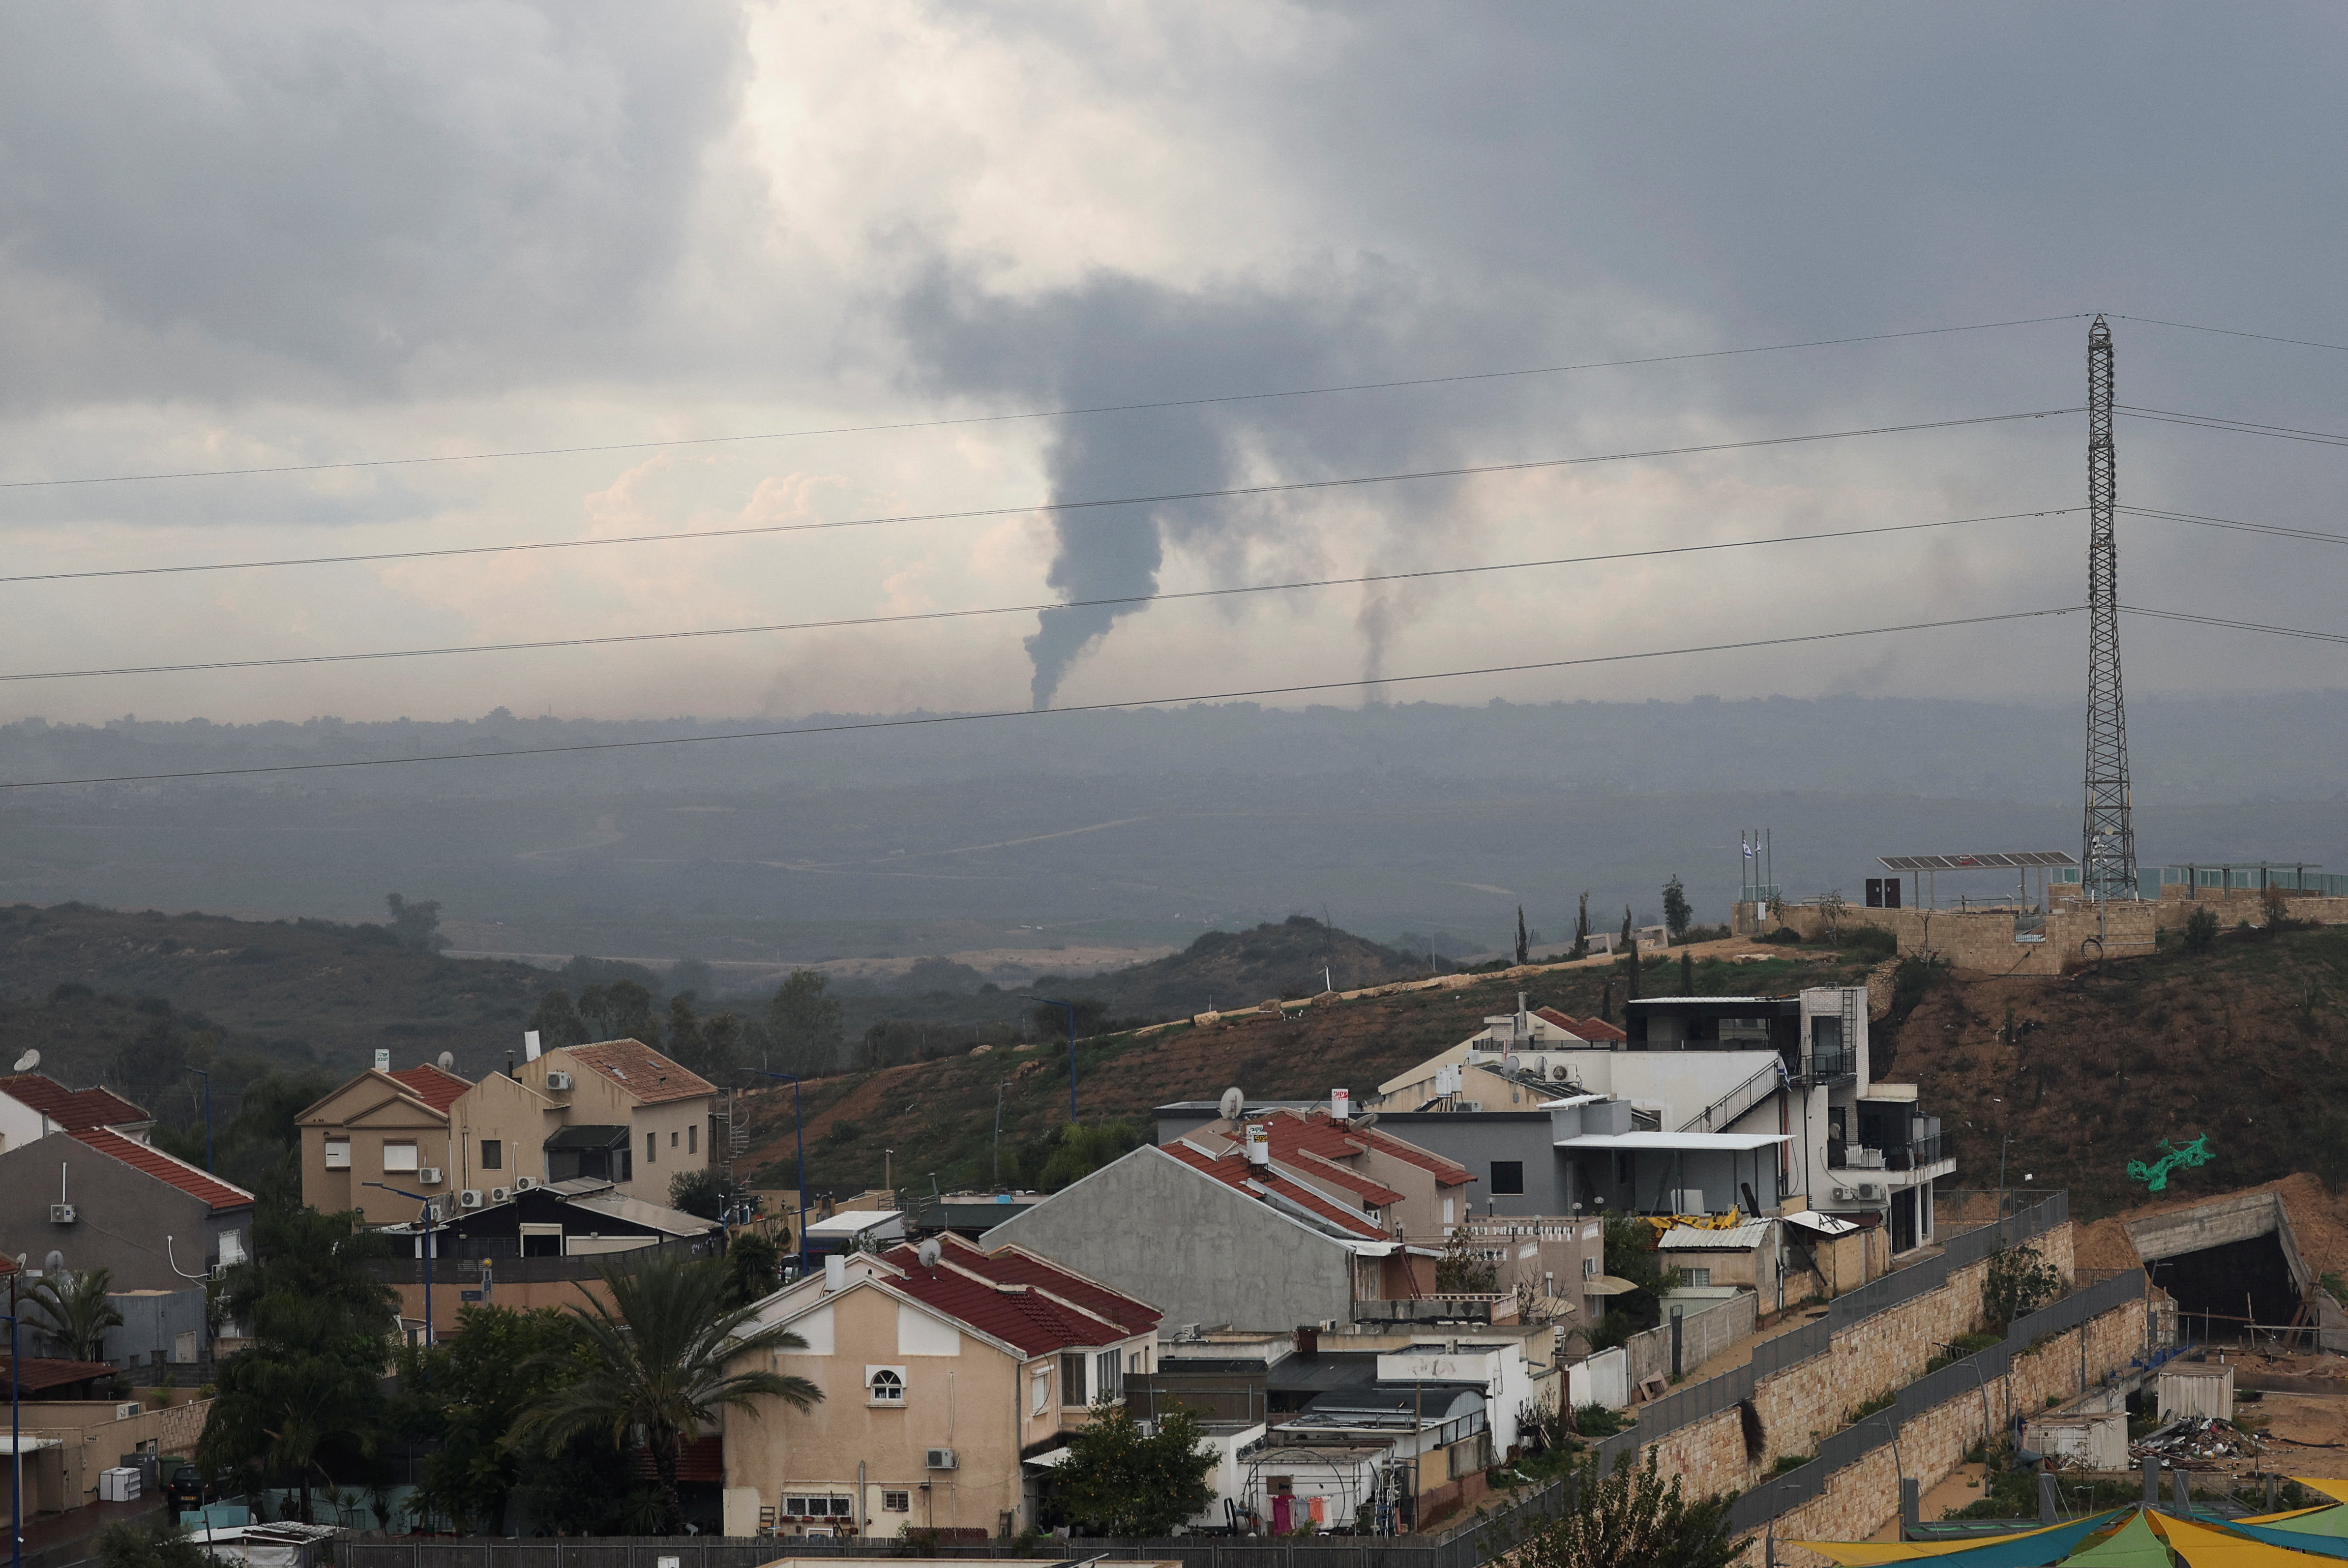 Smoke rises over Gaza, as seen from southern Israel